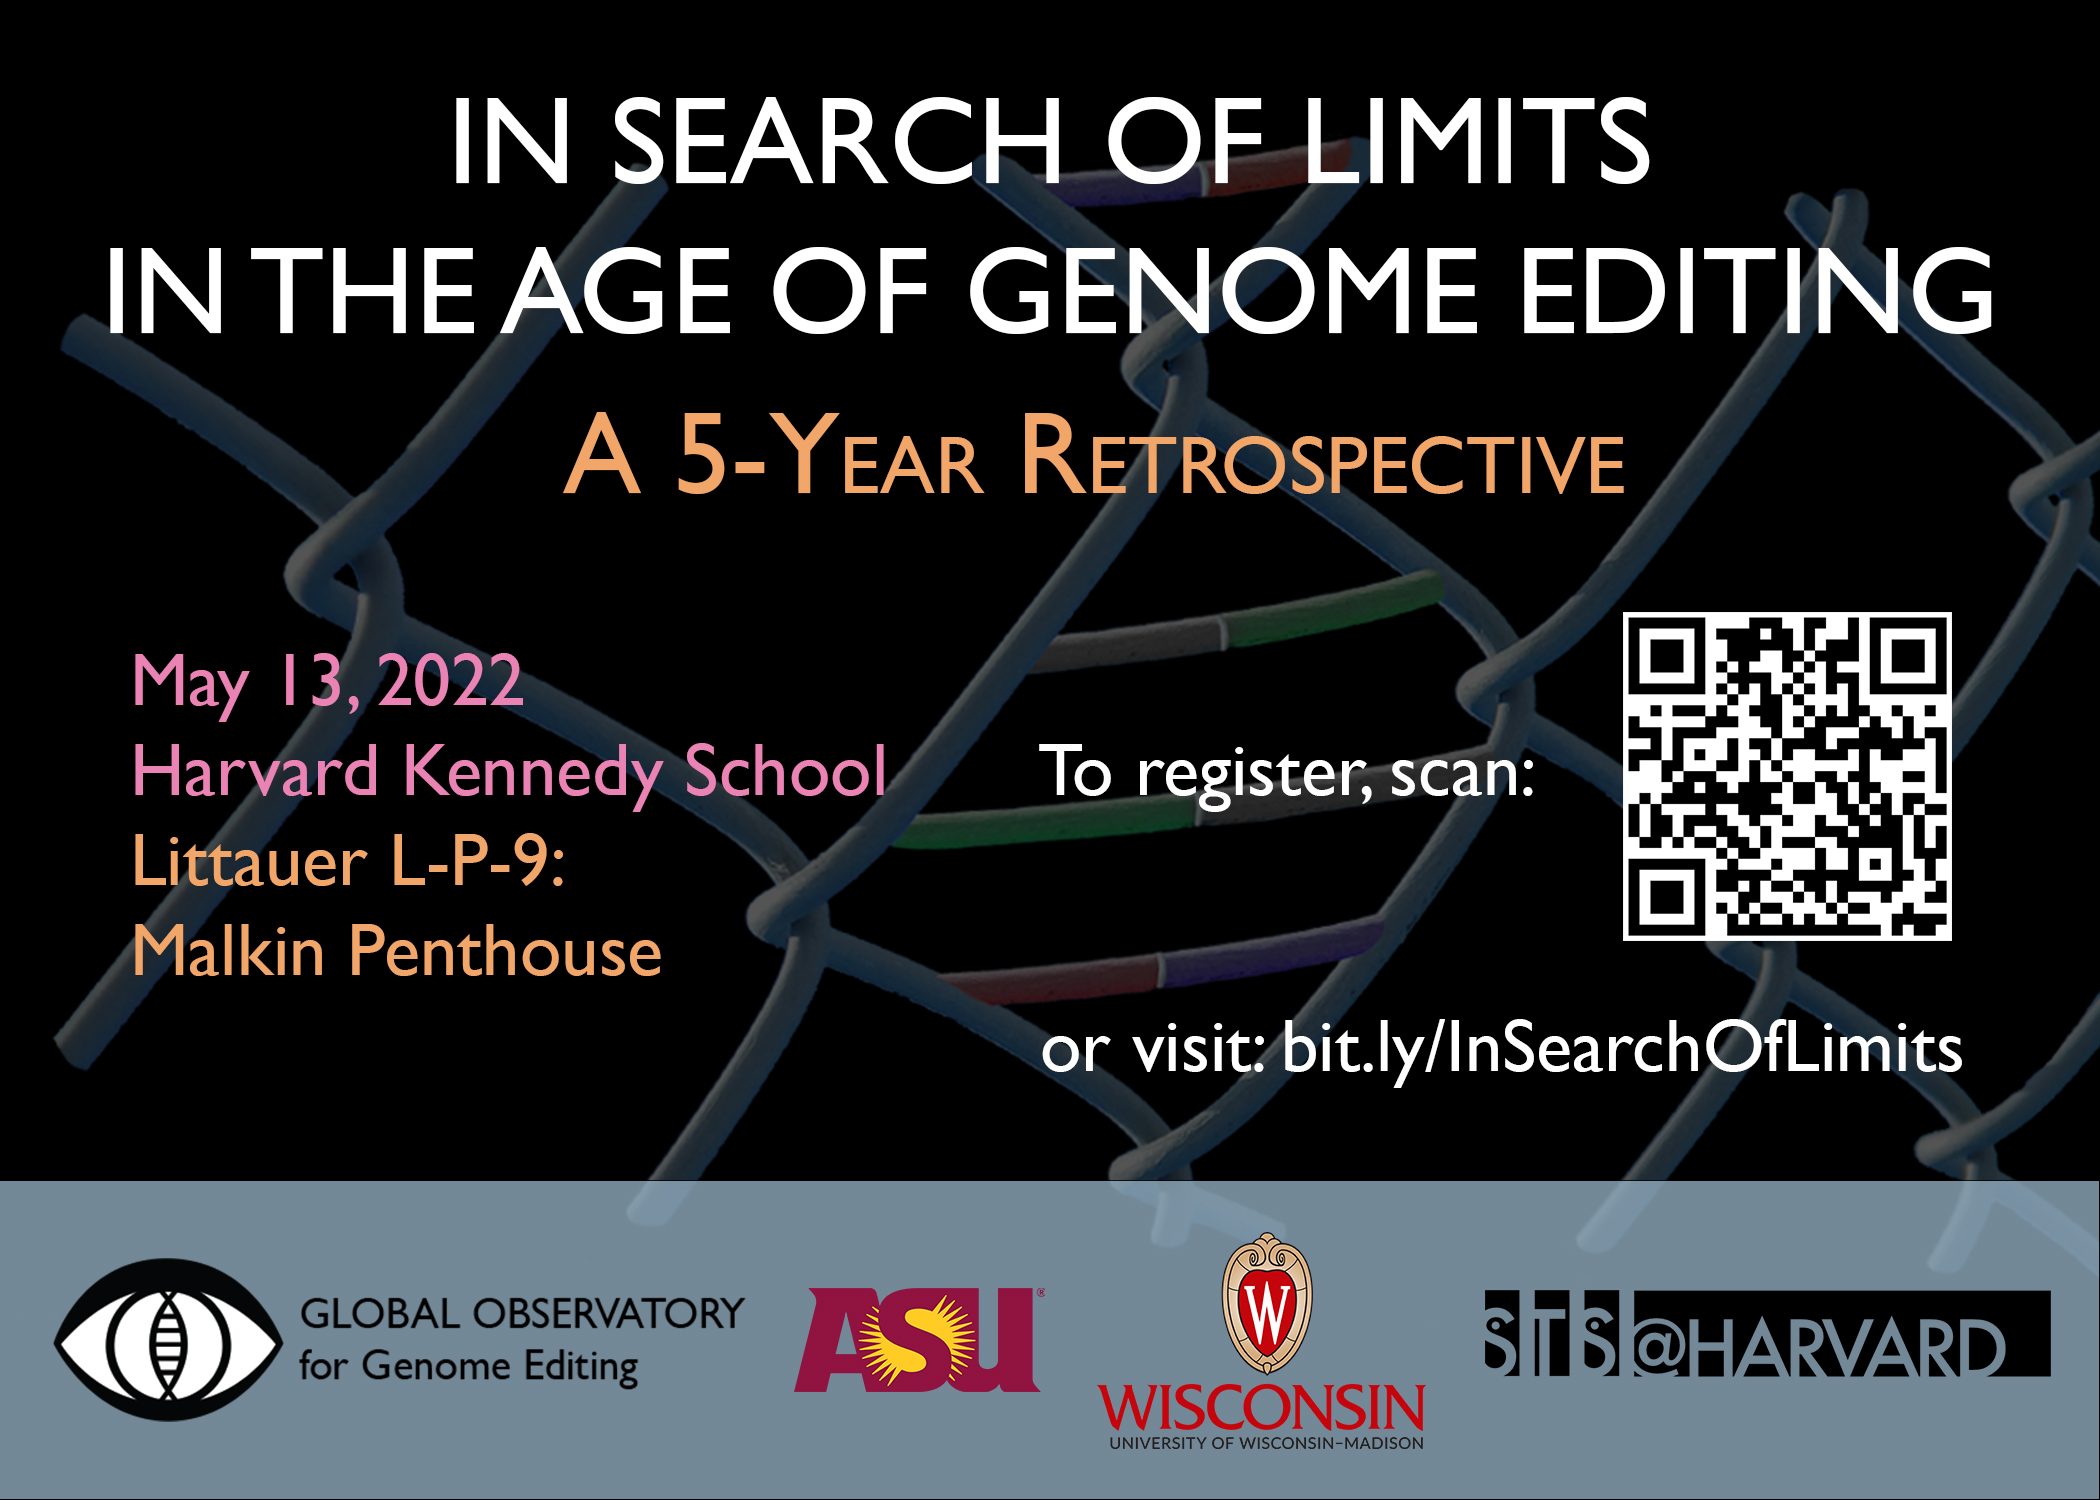 In Search of Limits in the Age of Genomic Editing: A 5-year Retrospective poster